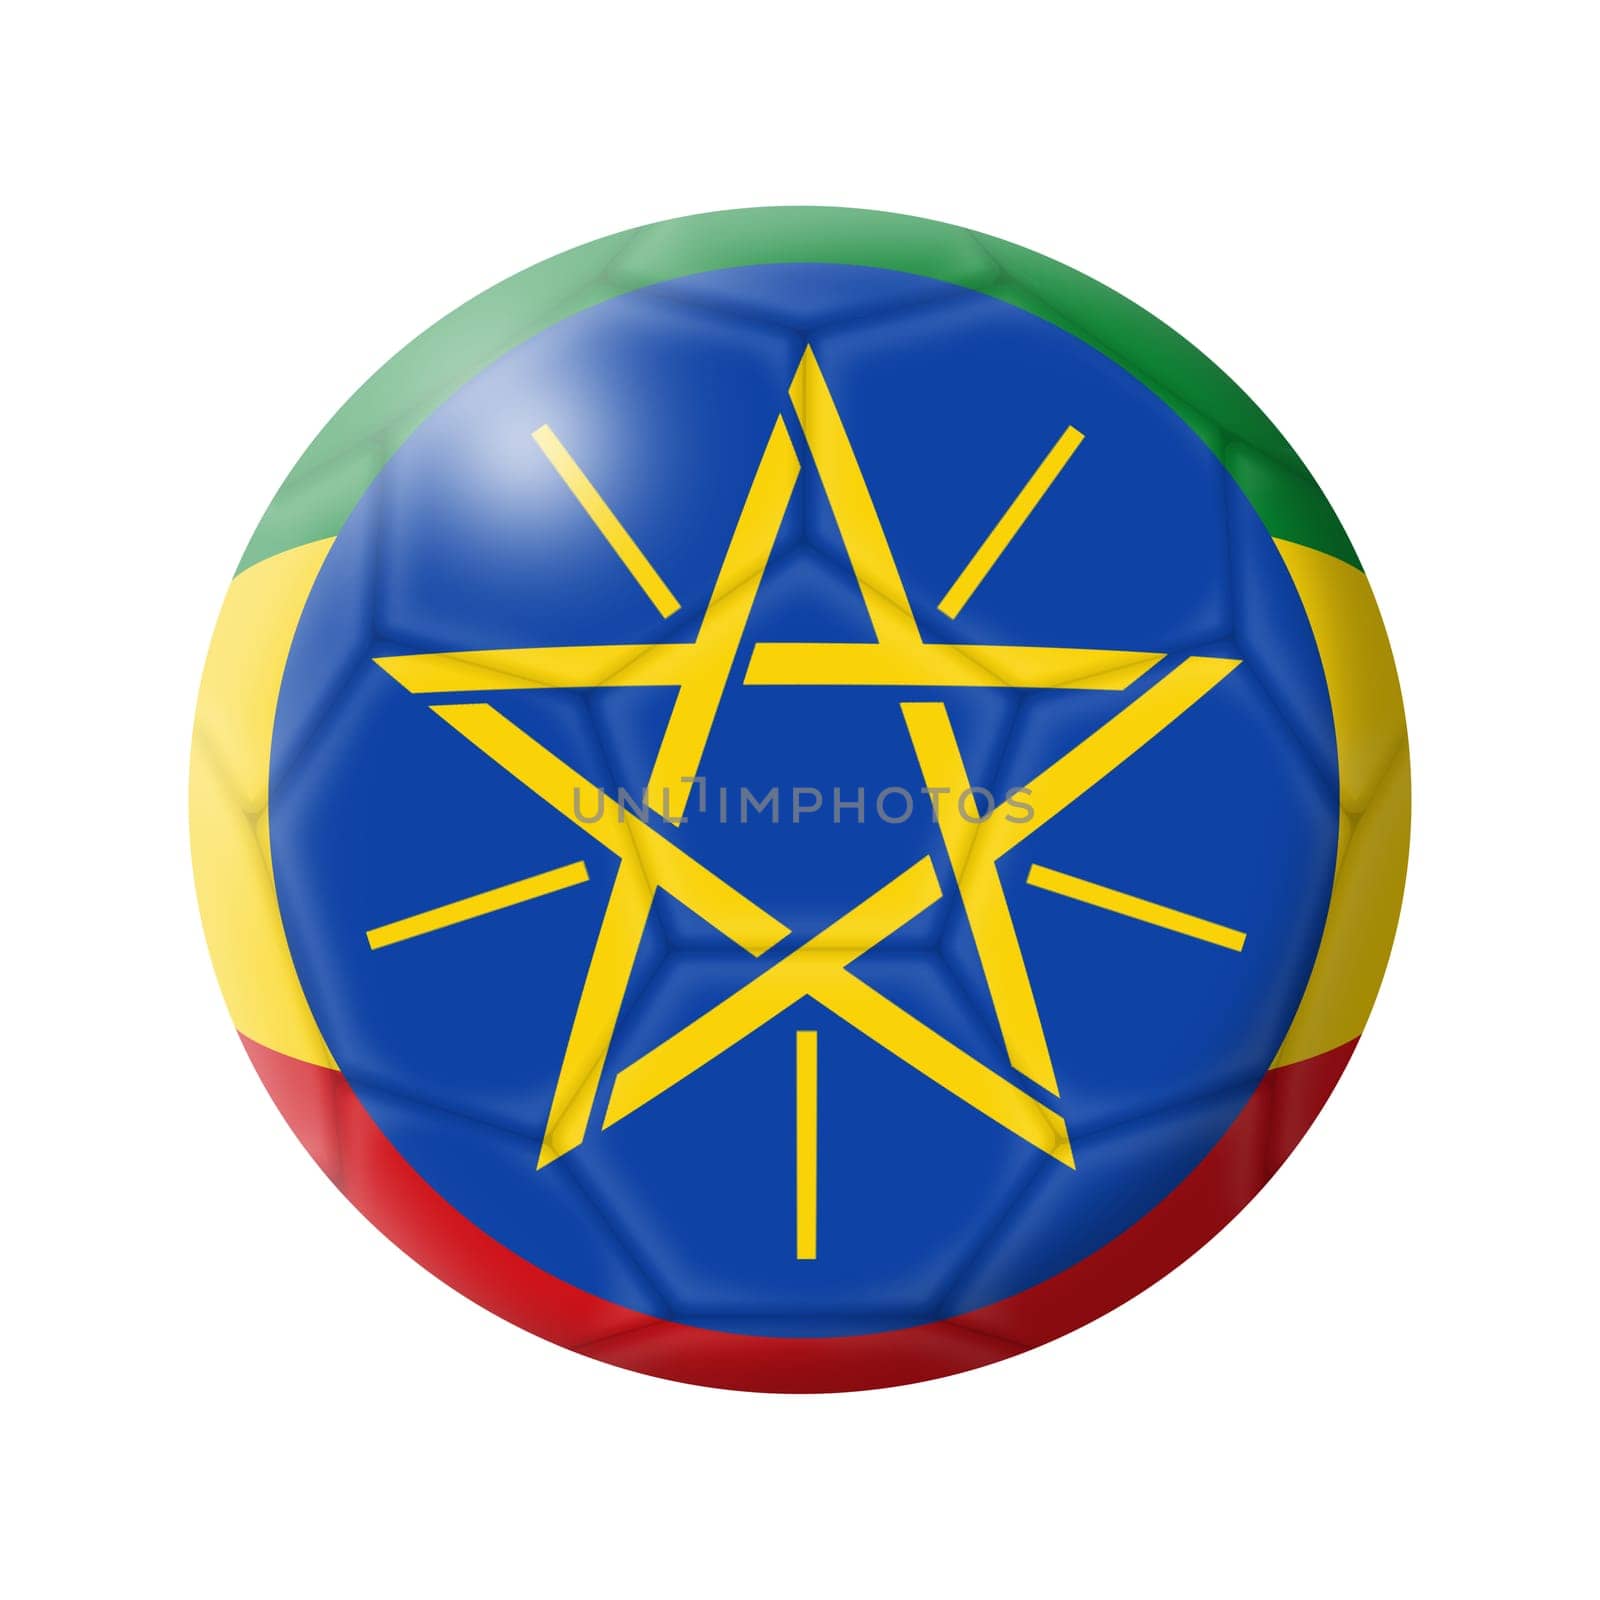 Ethiopia soccer ball football 3d illustration by VivacityImages